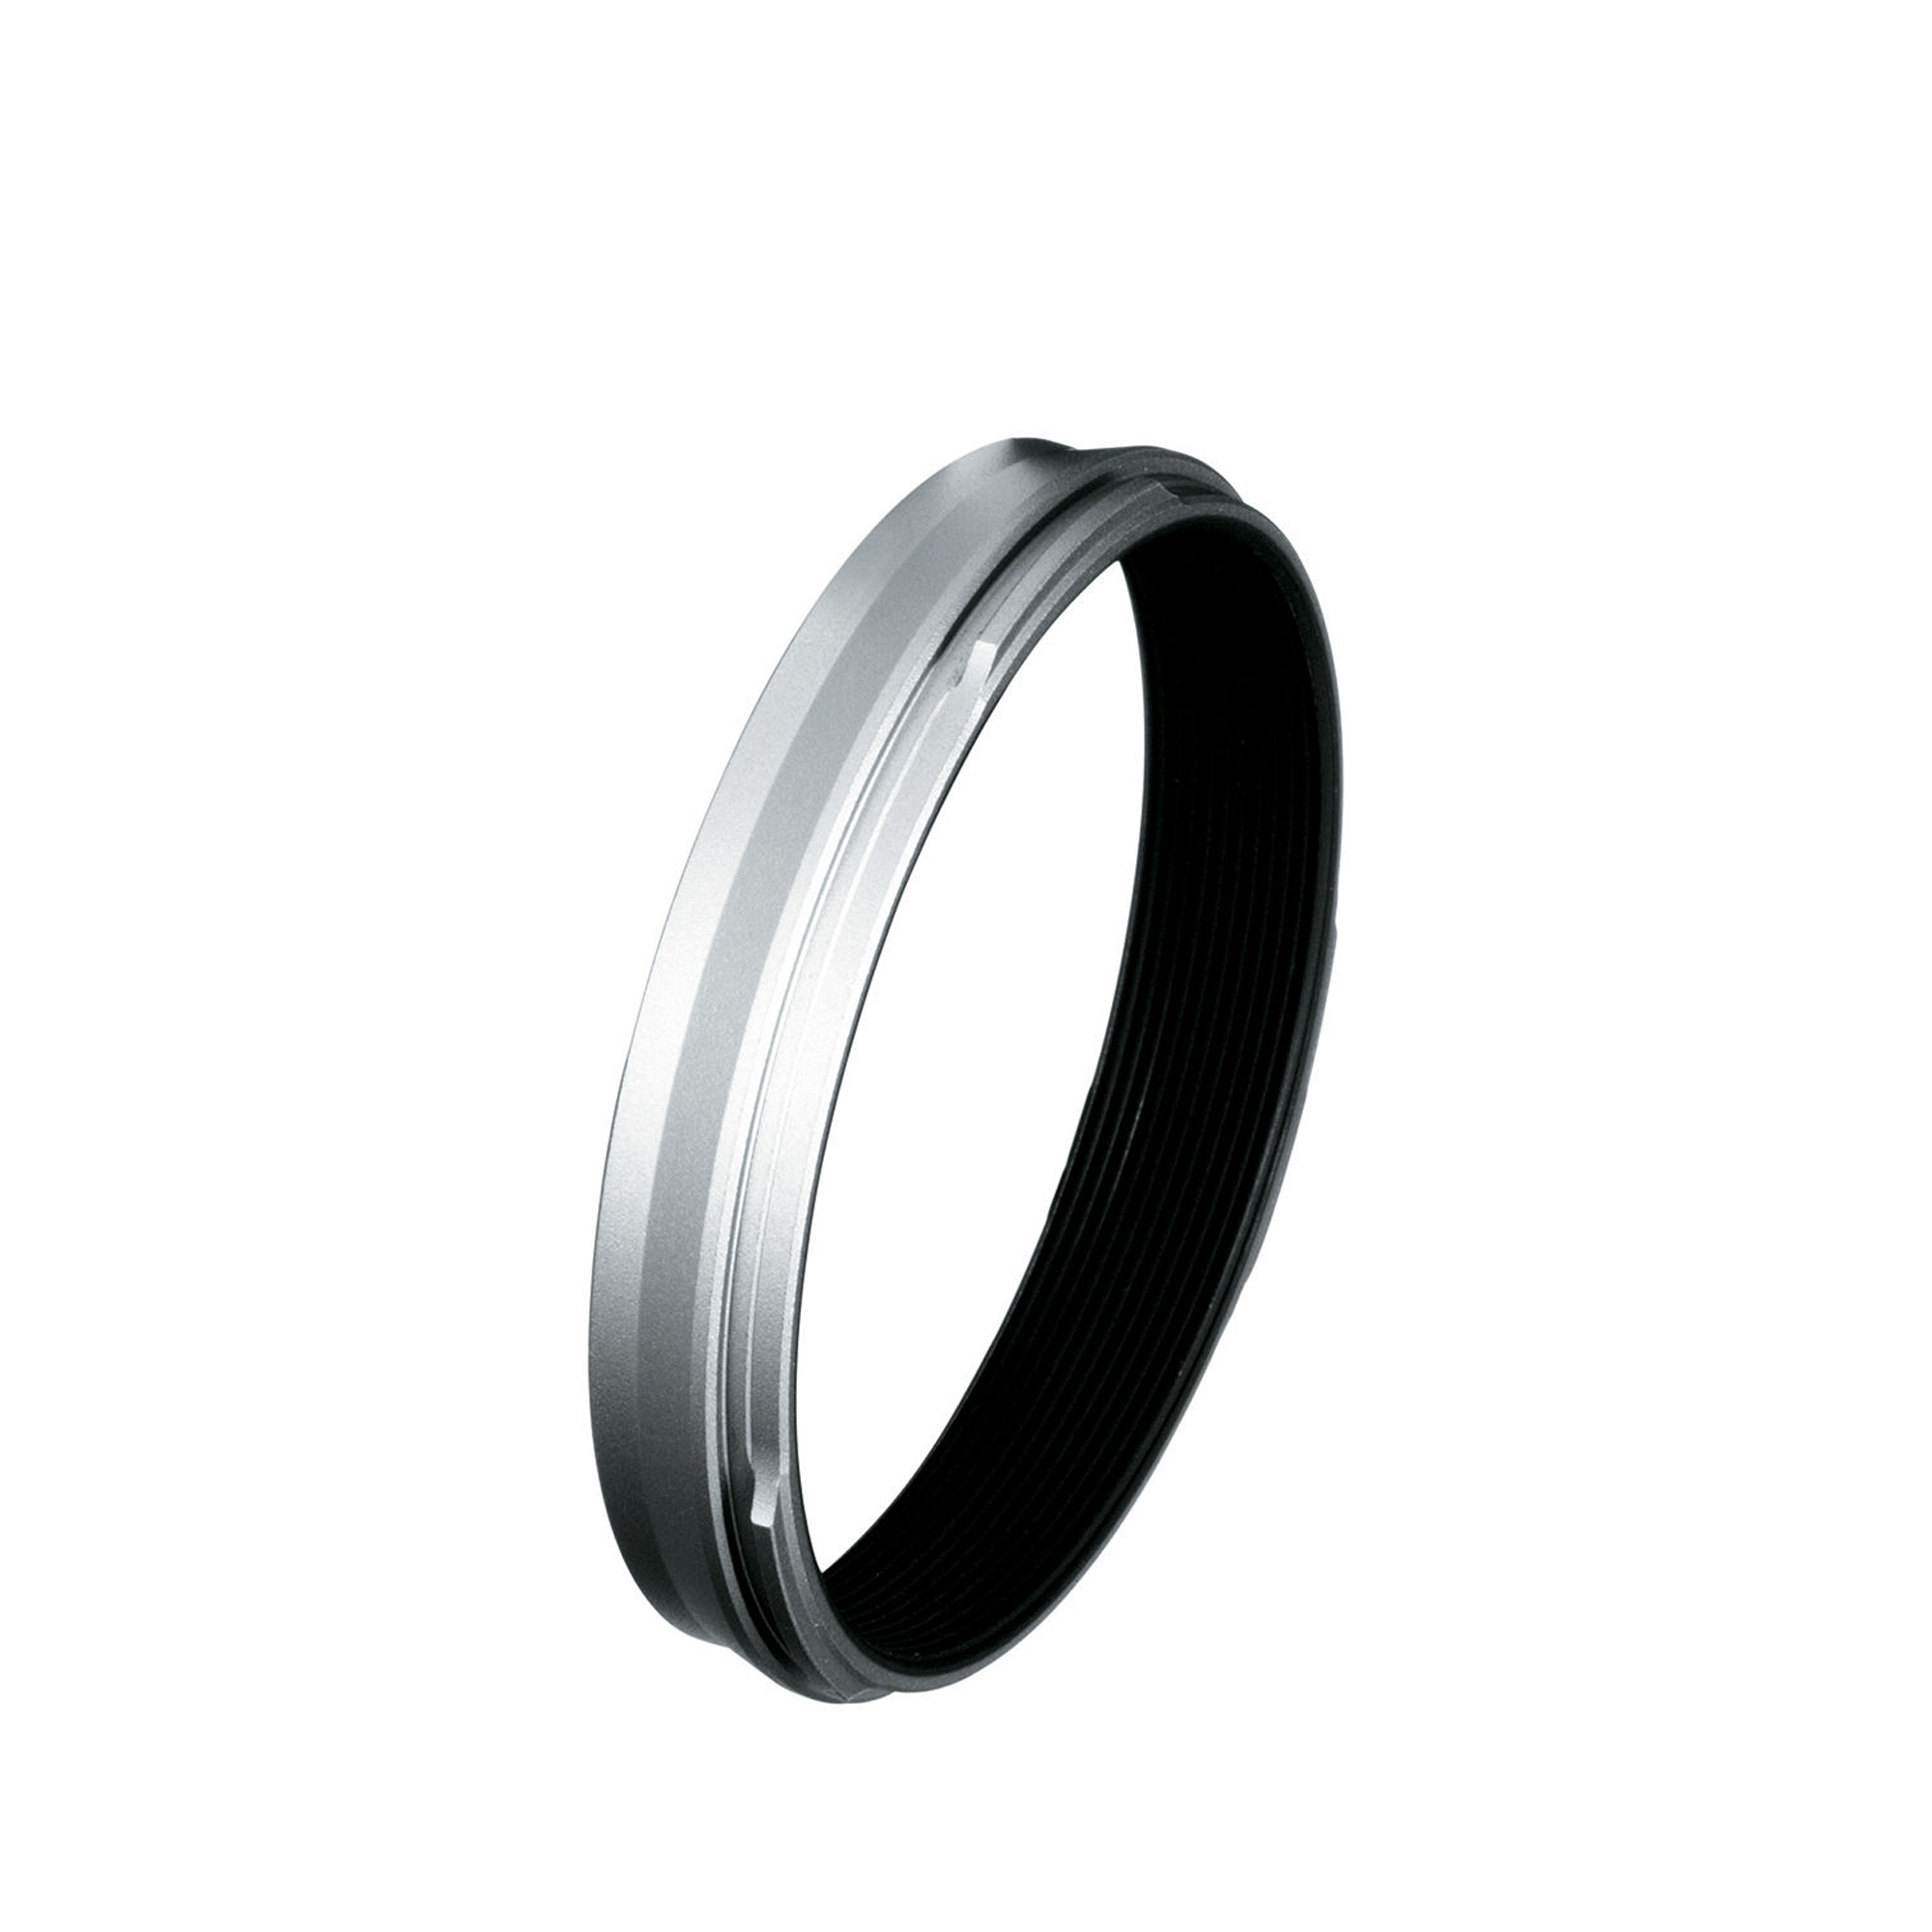 Fujifilm AR-X100S Silver Adapter Ring for X100 Series